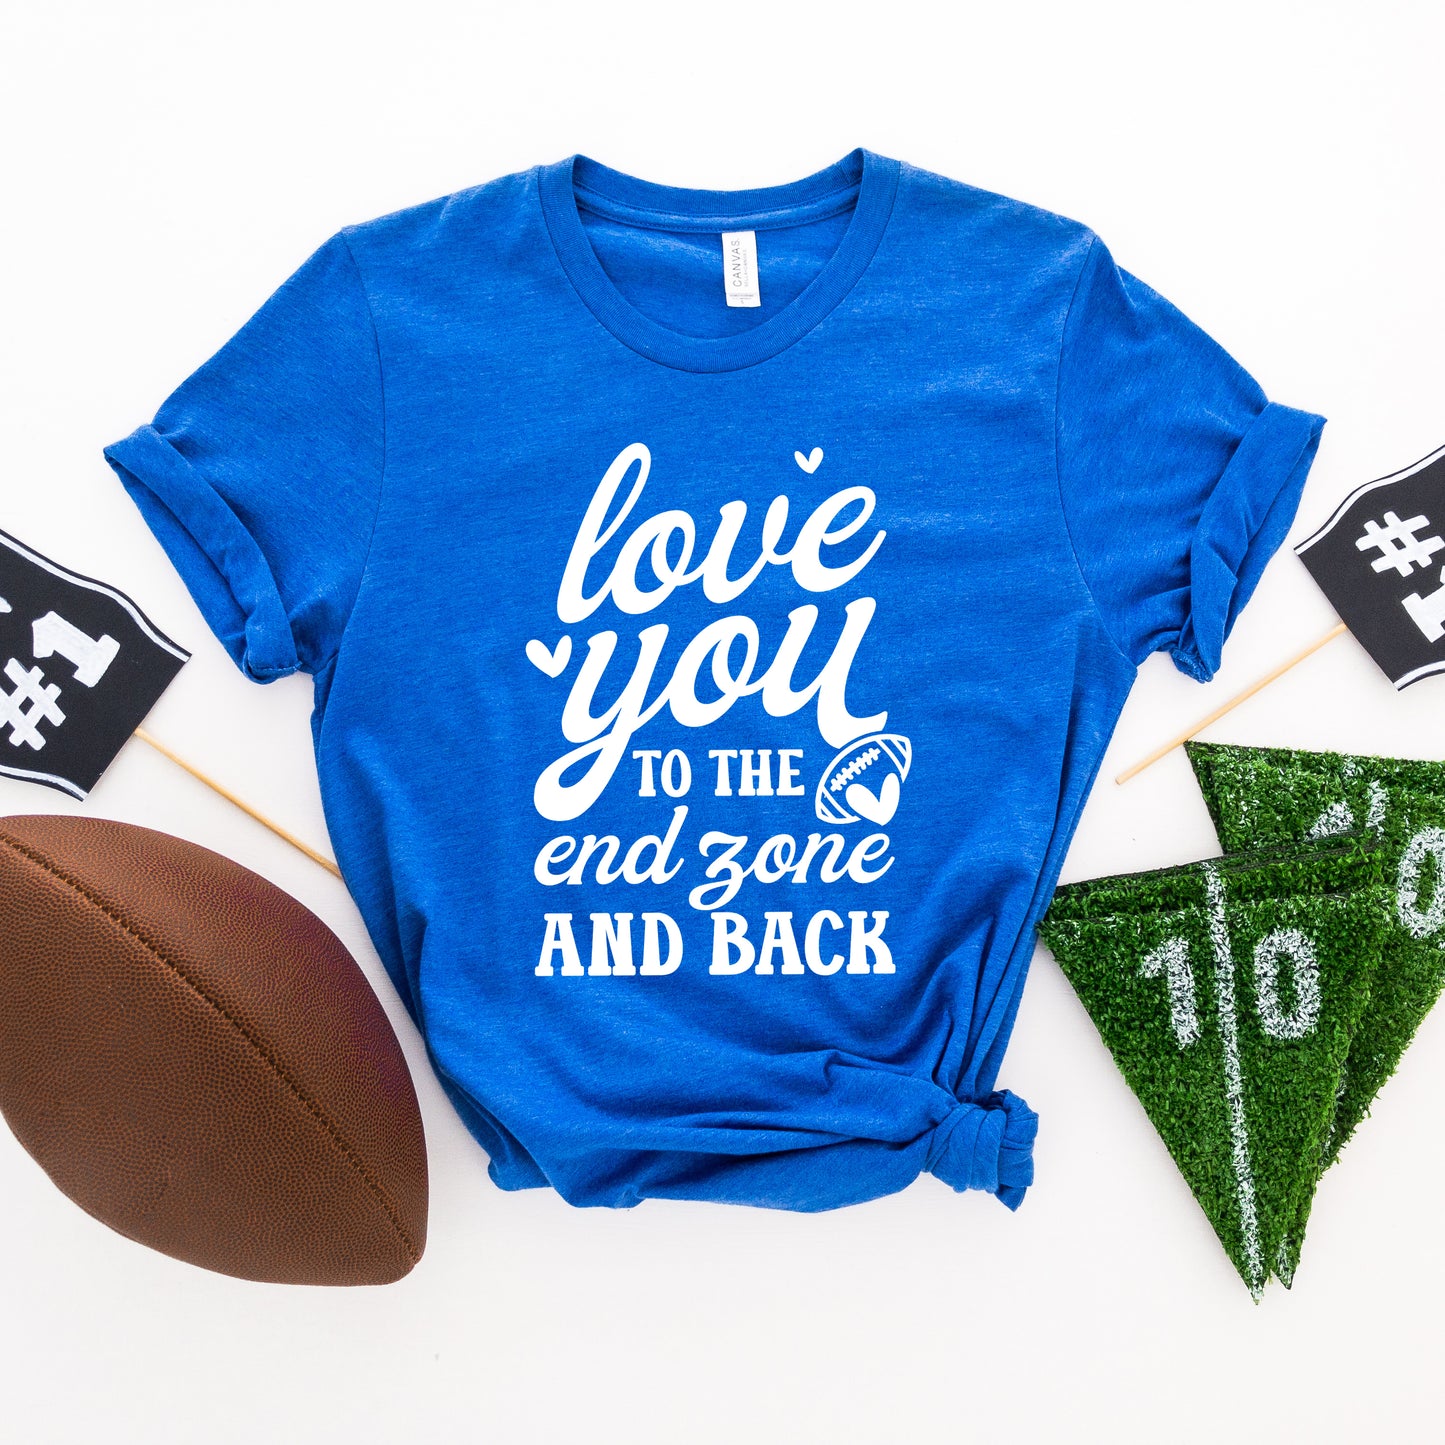 To The End Zone And Back | Short Sleeve Graphic Tee